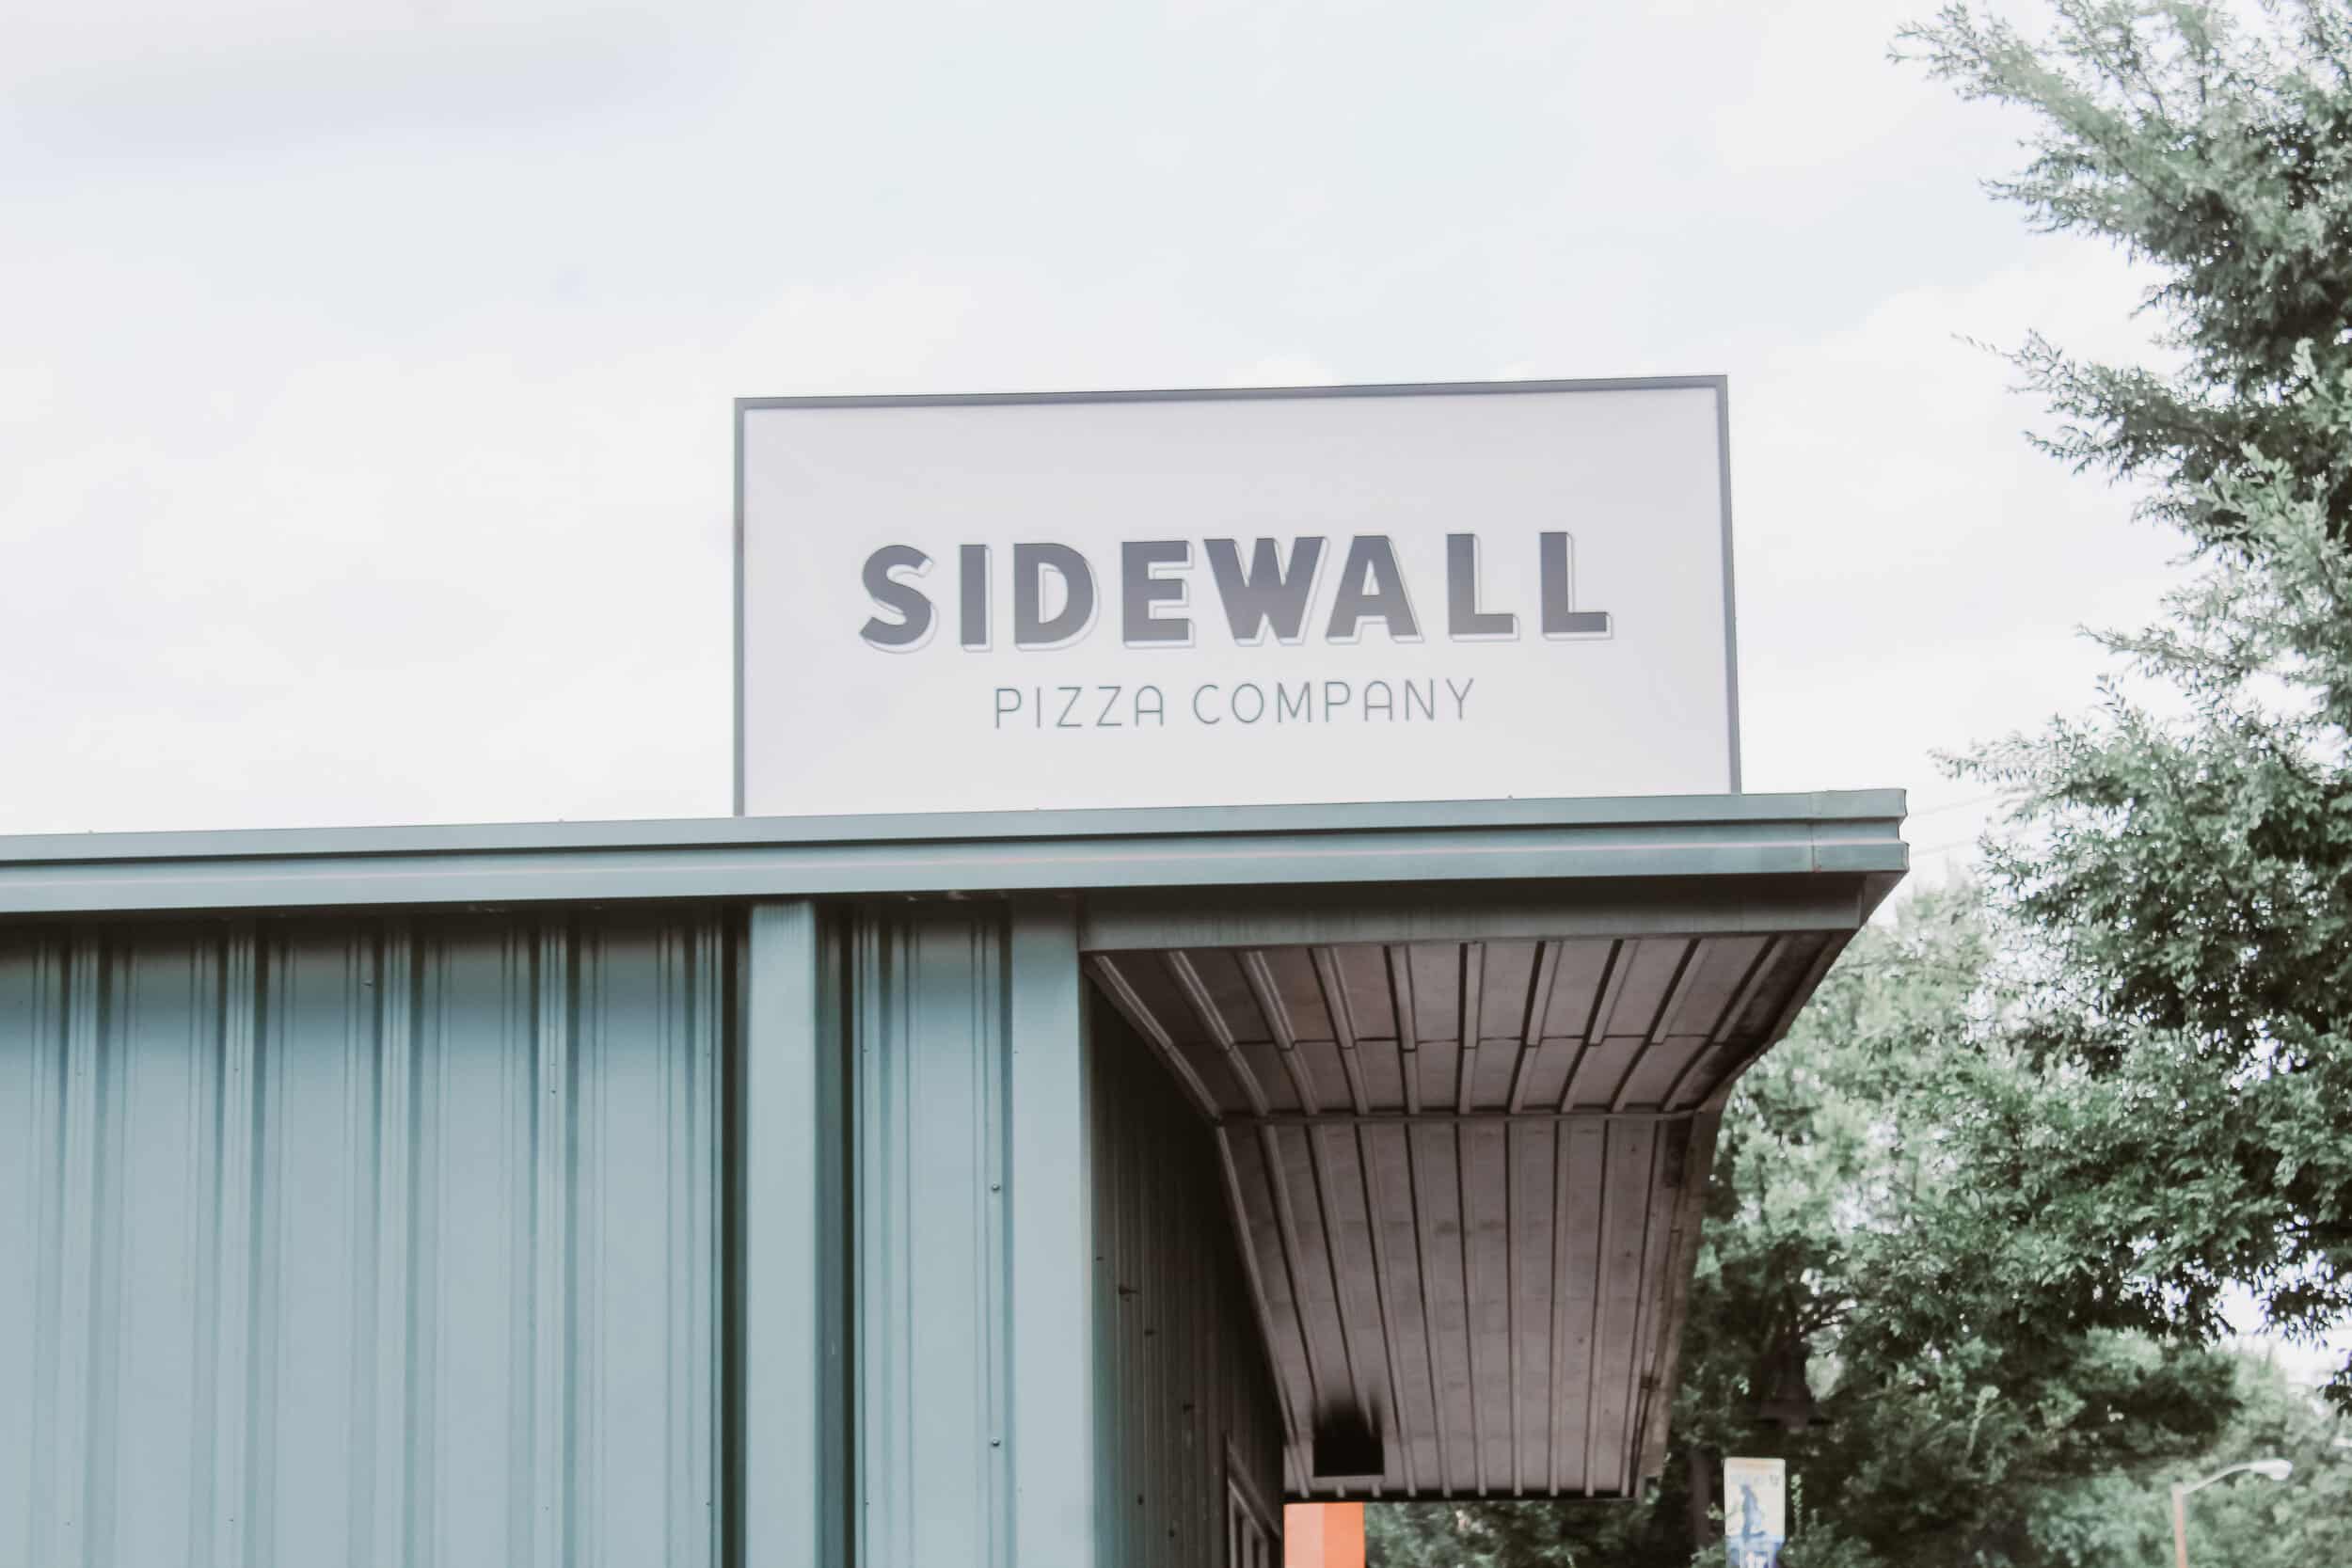 Sidewall Pizza Company is in the heart of downtown Travelers Rest, and it is a popular choice among those wanting pizza.